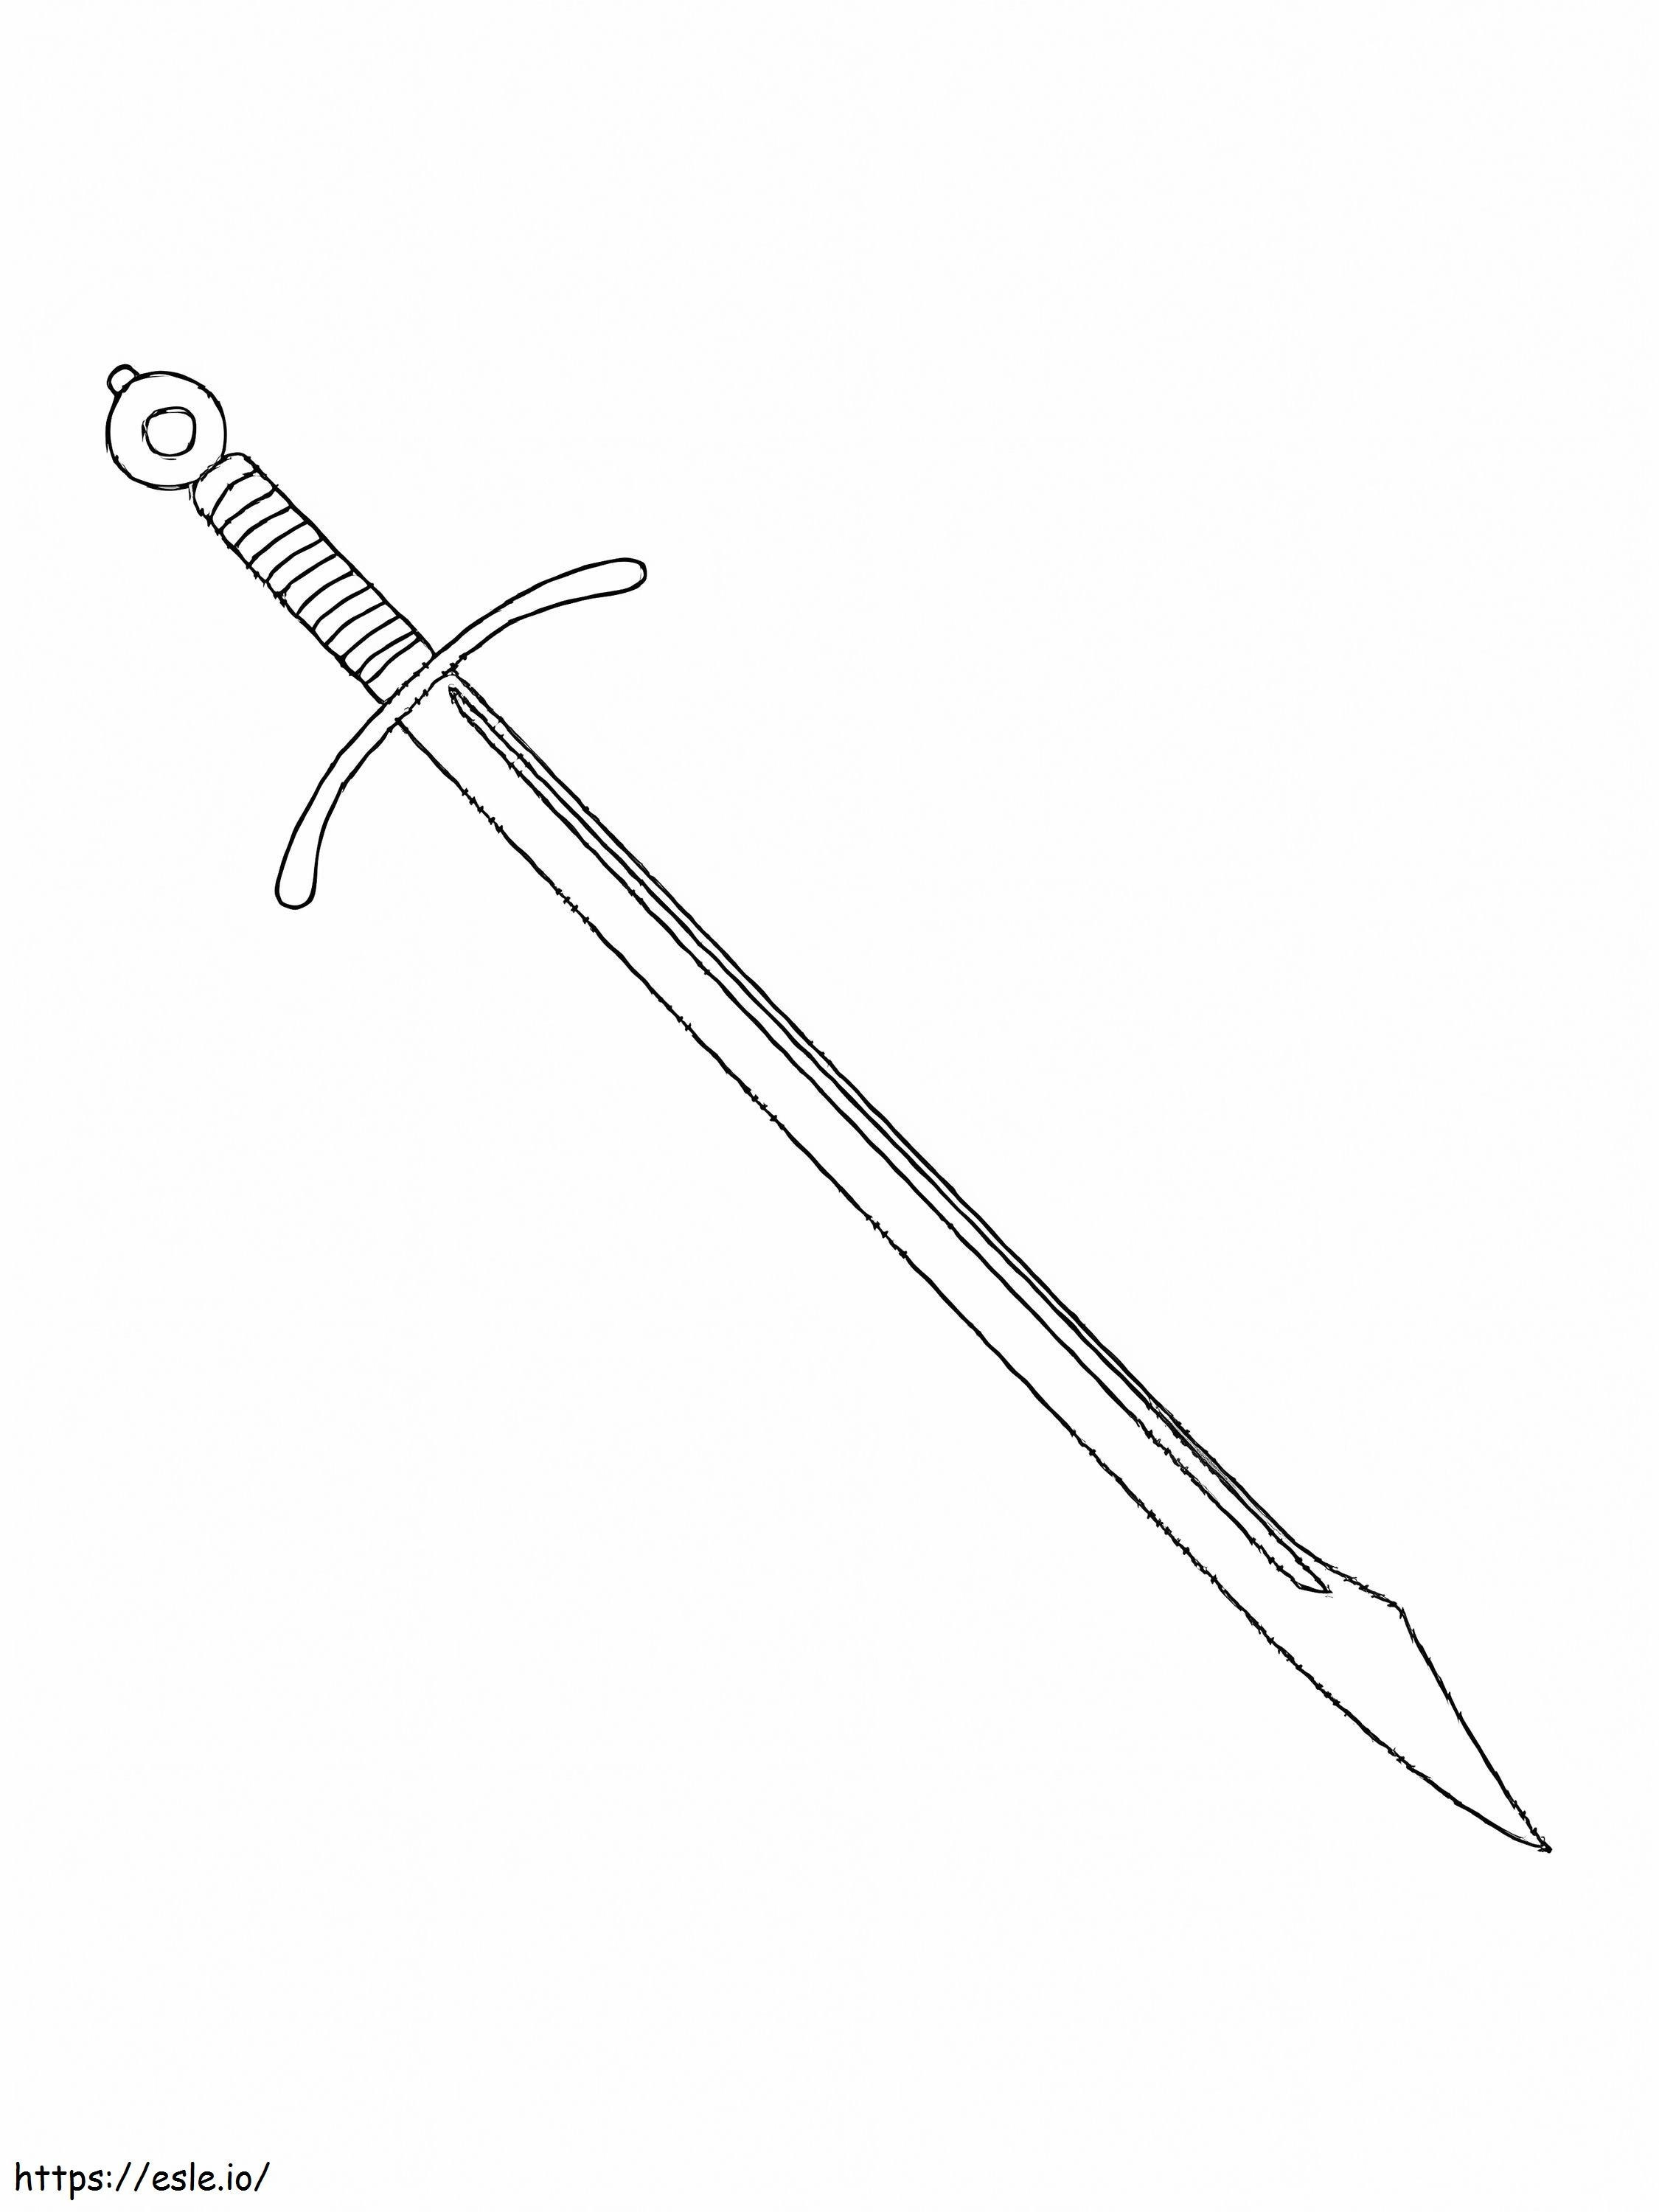 Sword 2 Coloring Pages coloring page